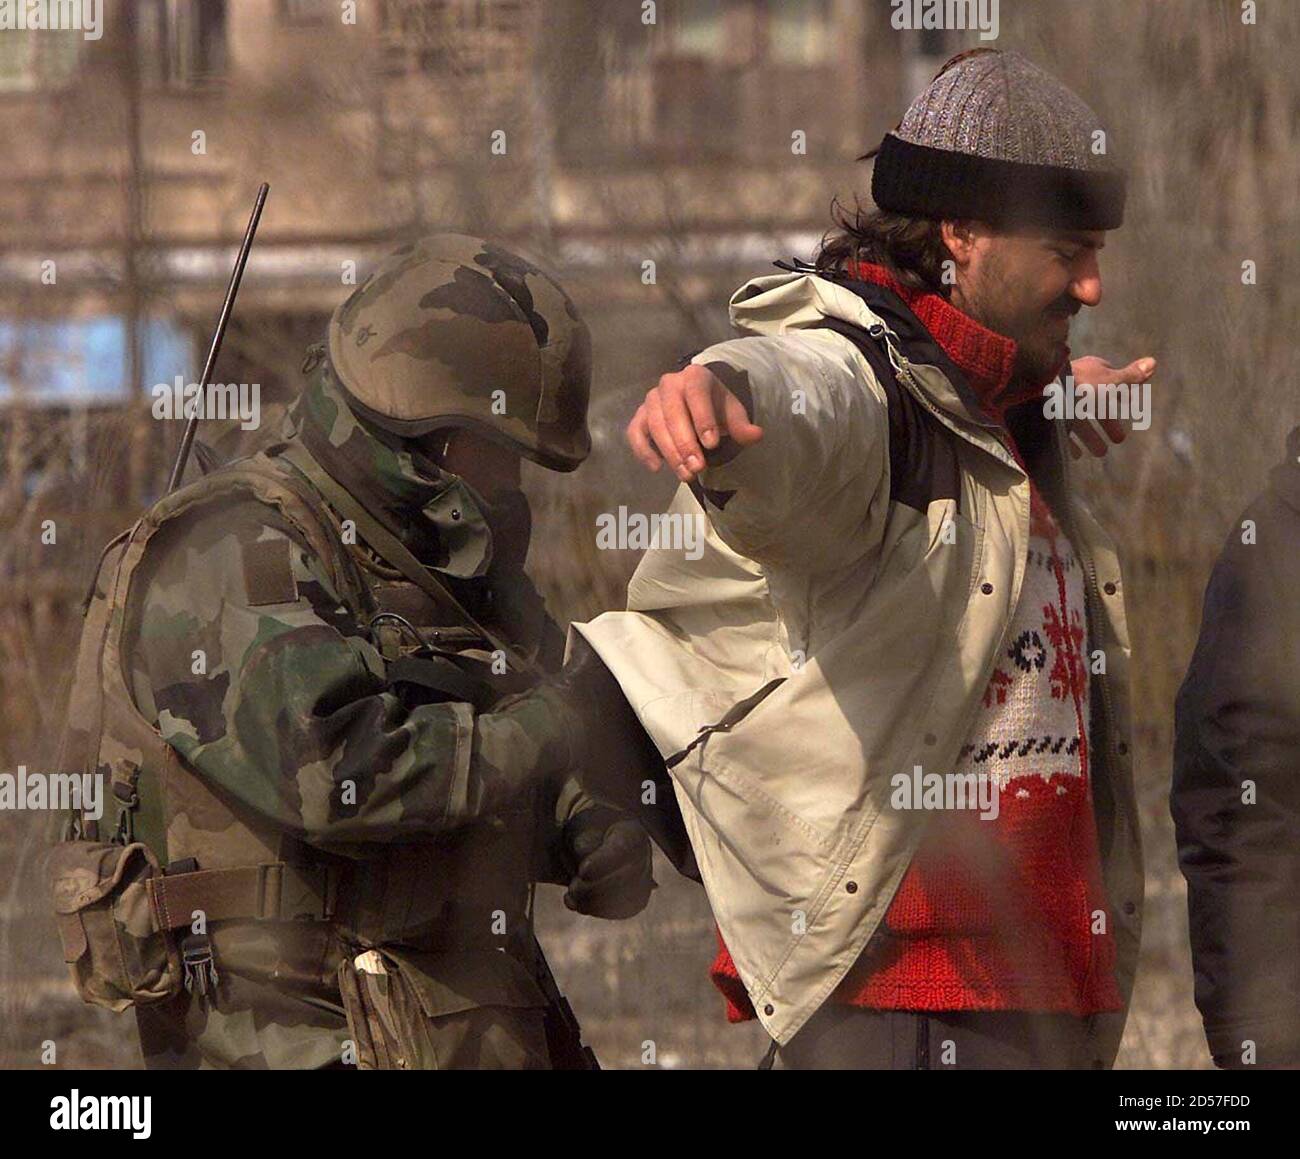 A French soldier checks a man for weapons on the main bridge of the divided city of Kosovska Mitrovica 24 February. The Kosovo peace keeping force said on Thursday it was pulling reinforcements out of strife-torn Mitrovica as calm returned and France committed to sending more troops. Stock Photo